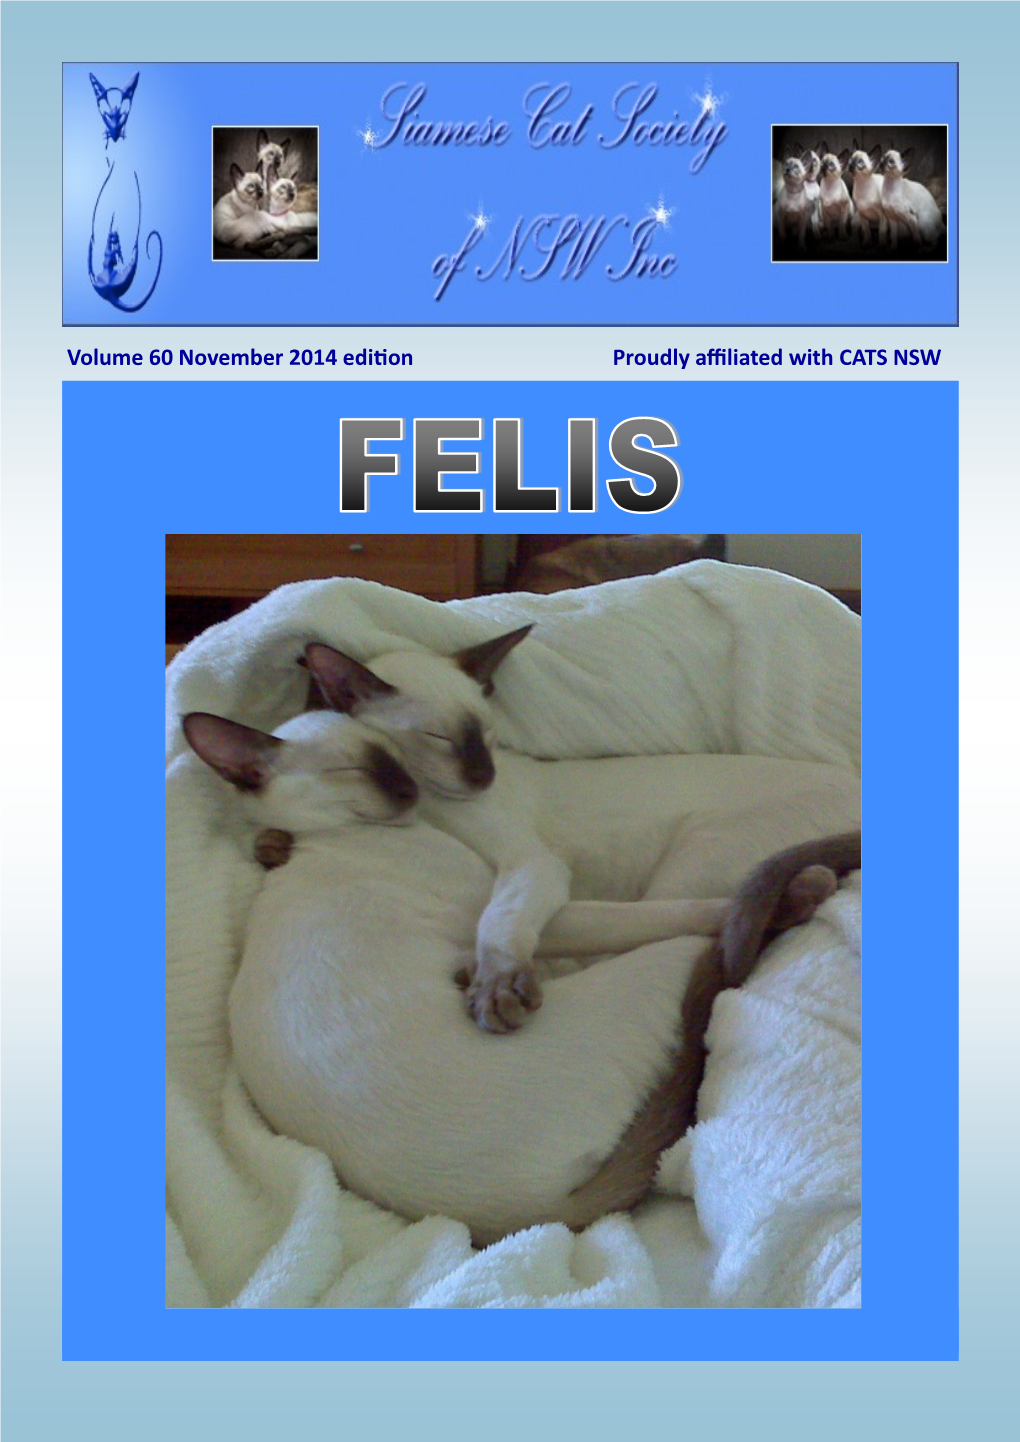 Volume 60 November 2014 Edition Proudly Affiliated with CATS NSW